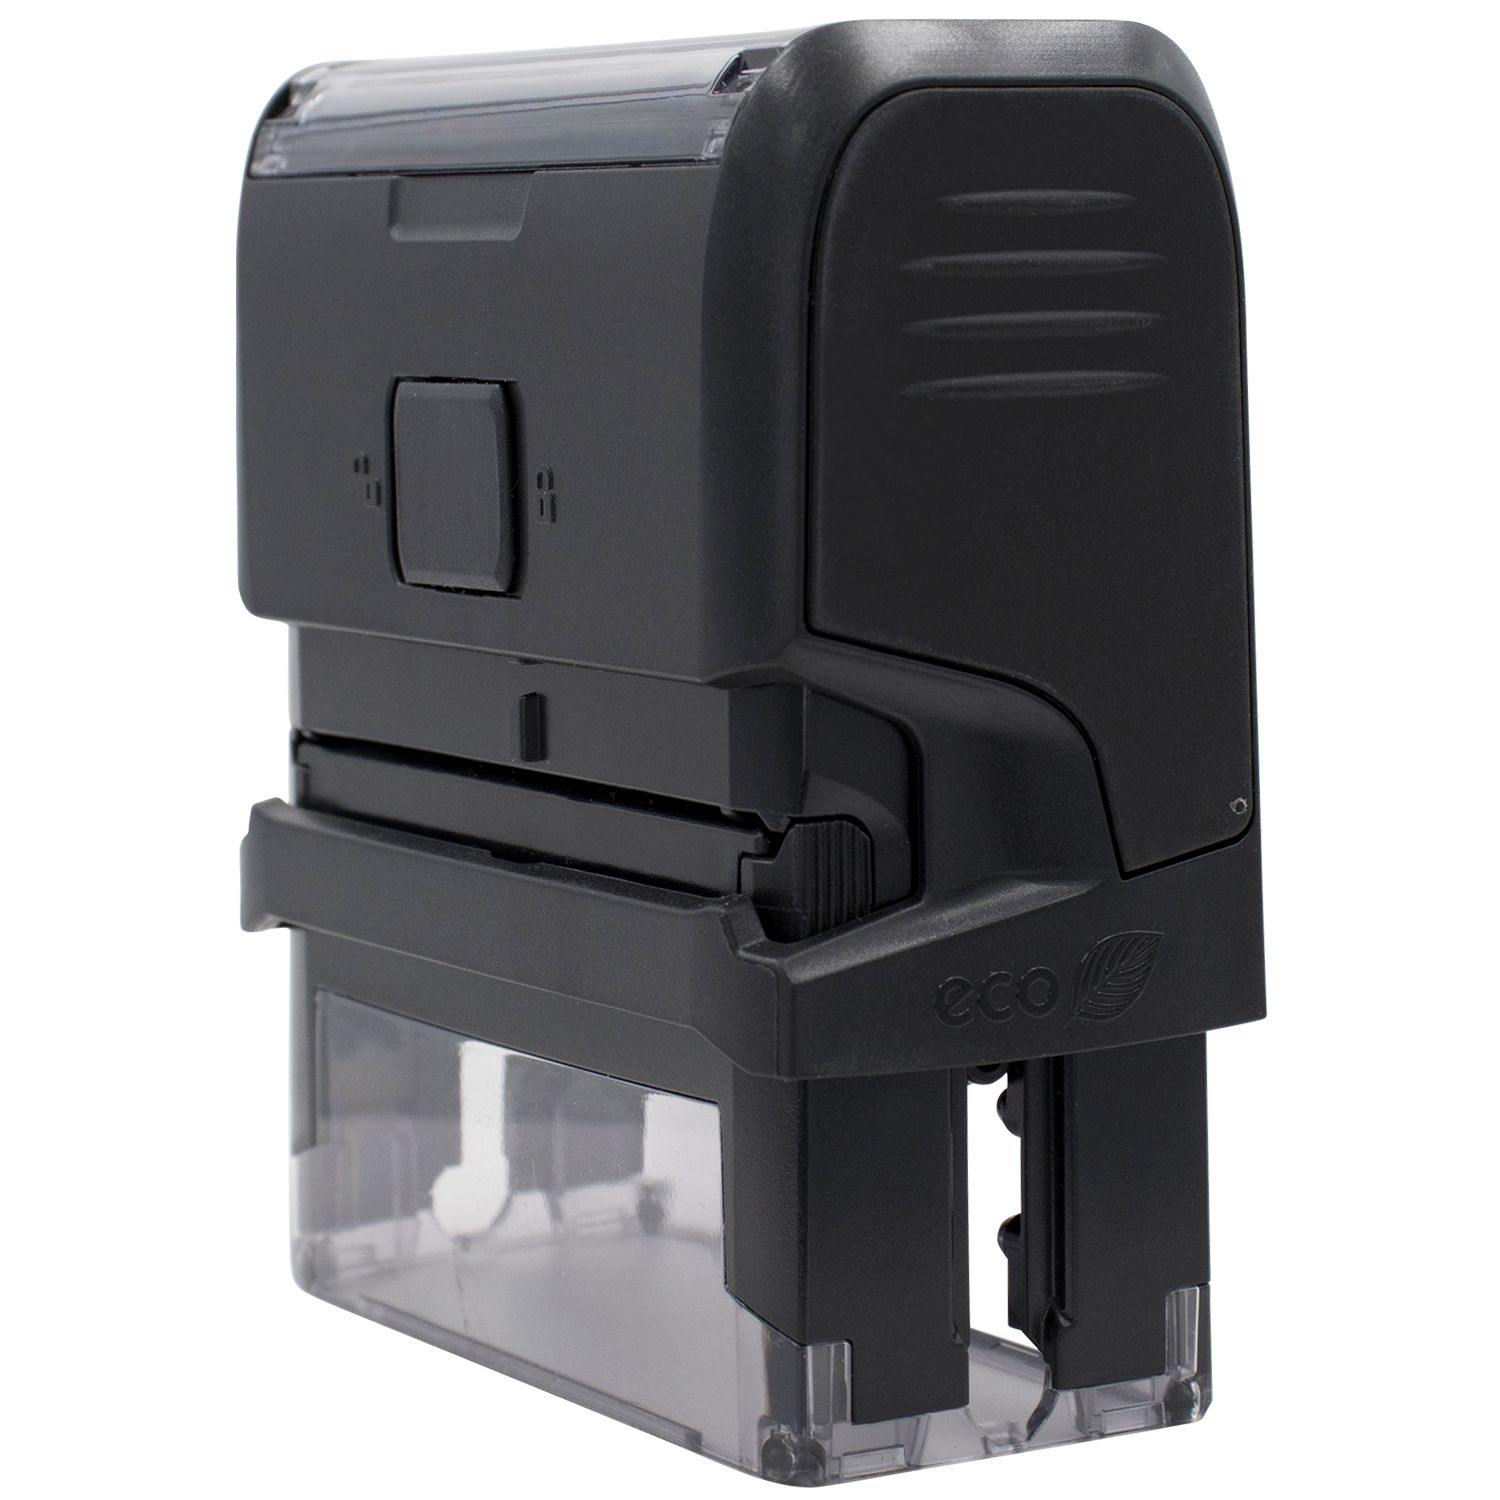 Side View of Large Self Inking Cod Stamp at an Angle